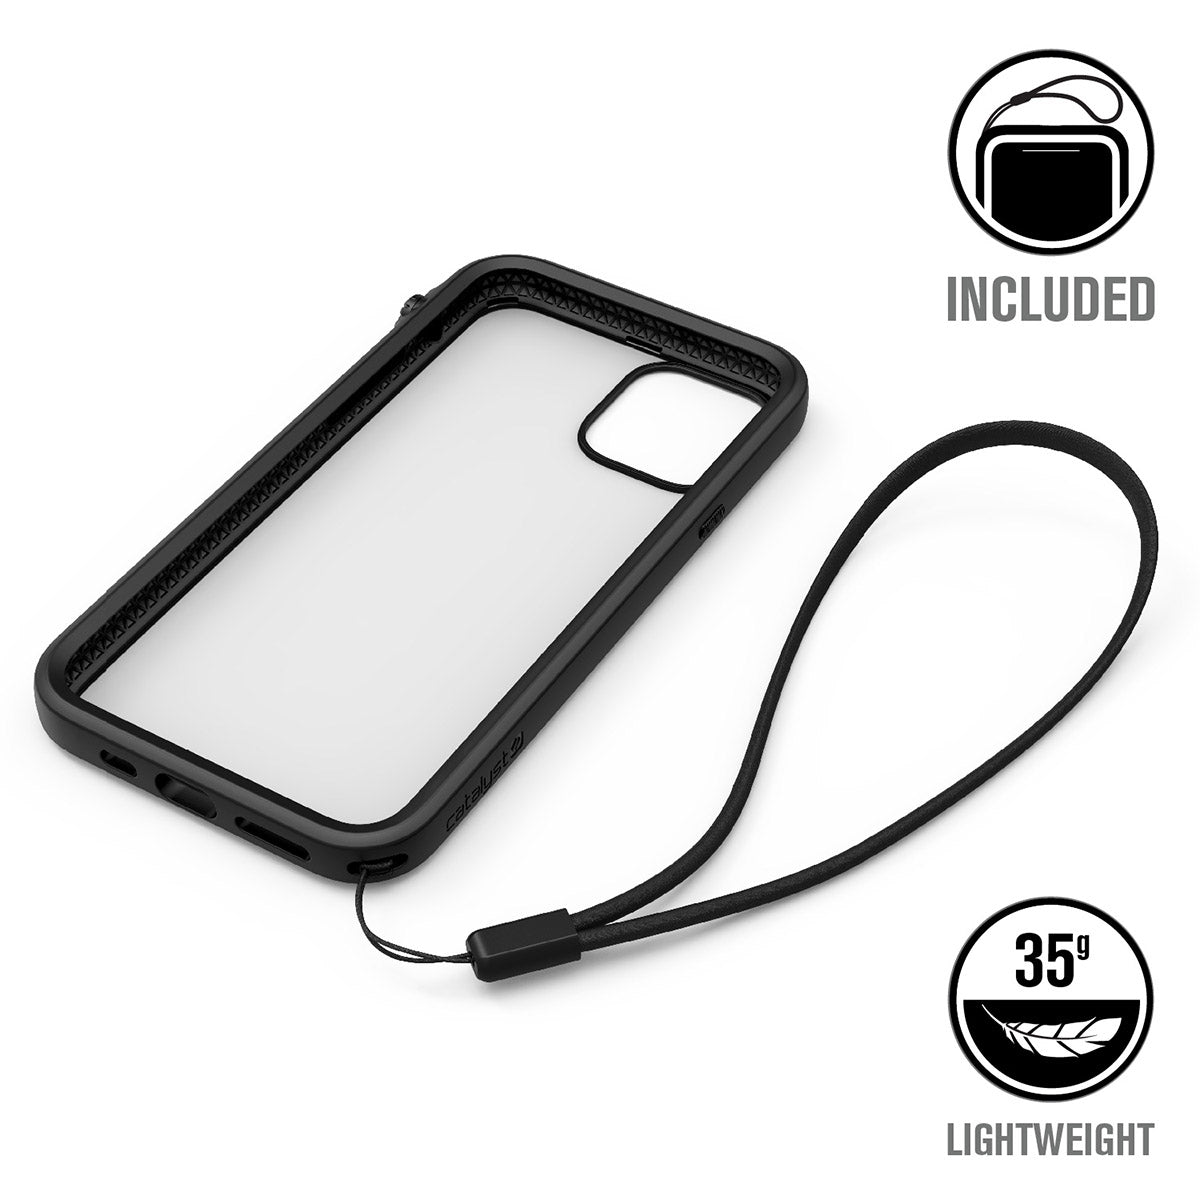 catalyst iPhone 11 series impact protection case empty black case for iPhone 11 pro with a lanyard text reads included 35g lightweight